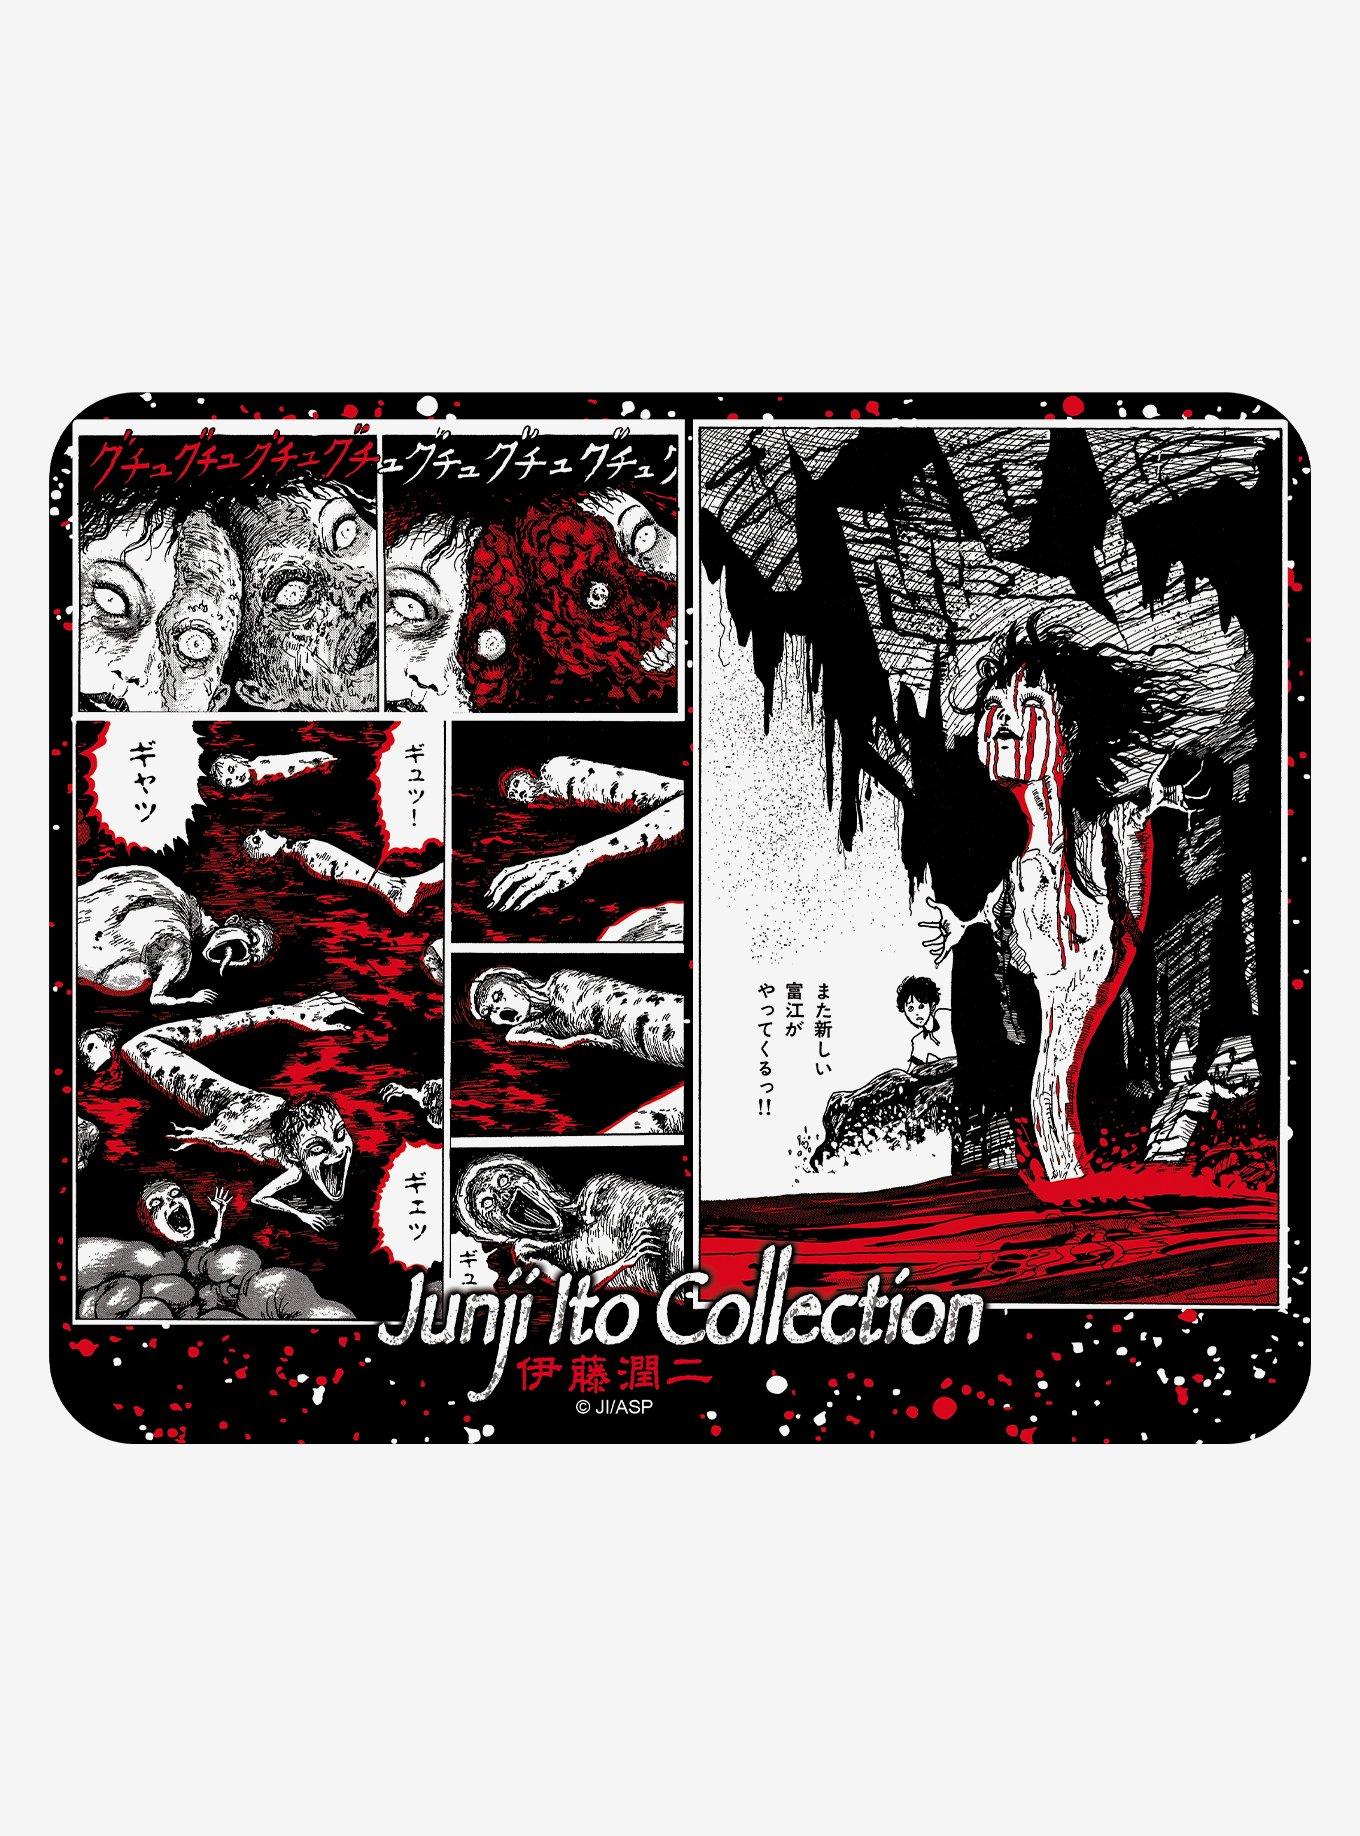 Junji Ito Collection: The Complete Series [Blu-ray]